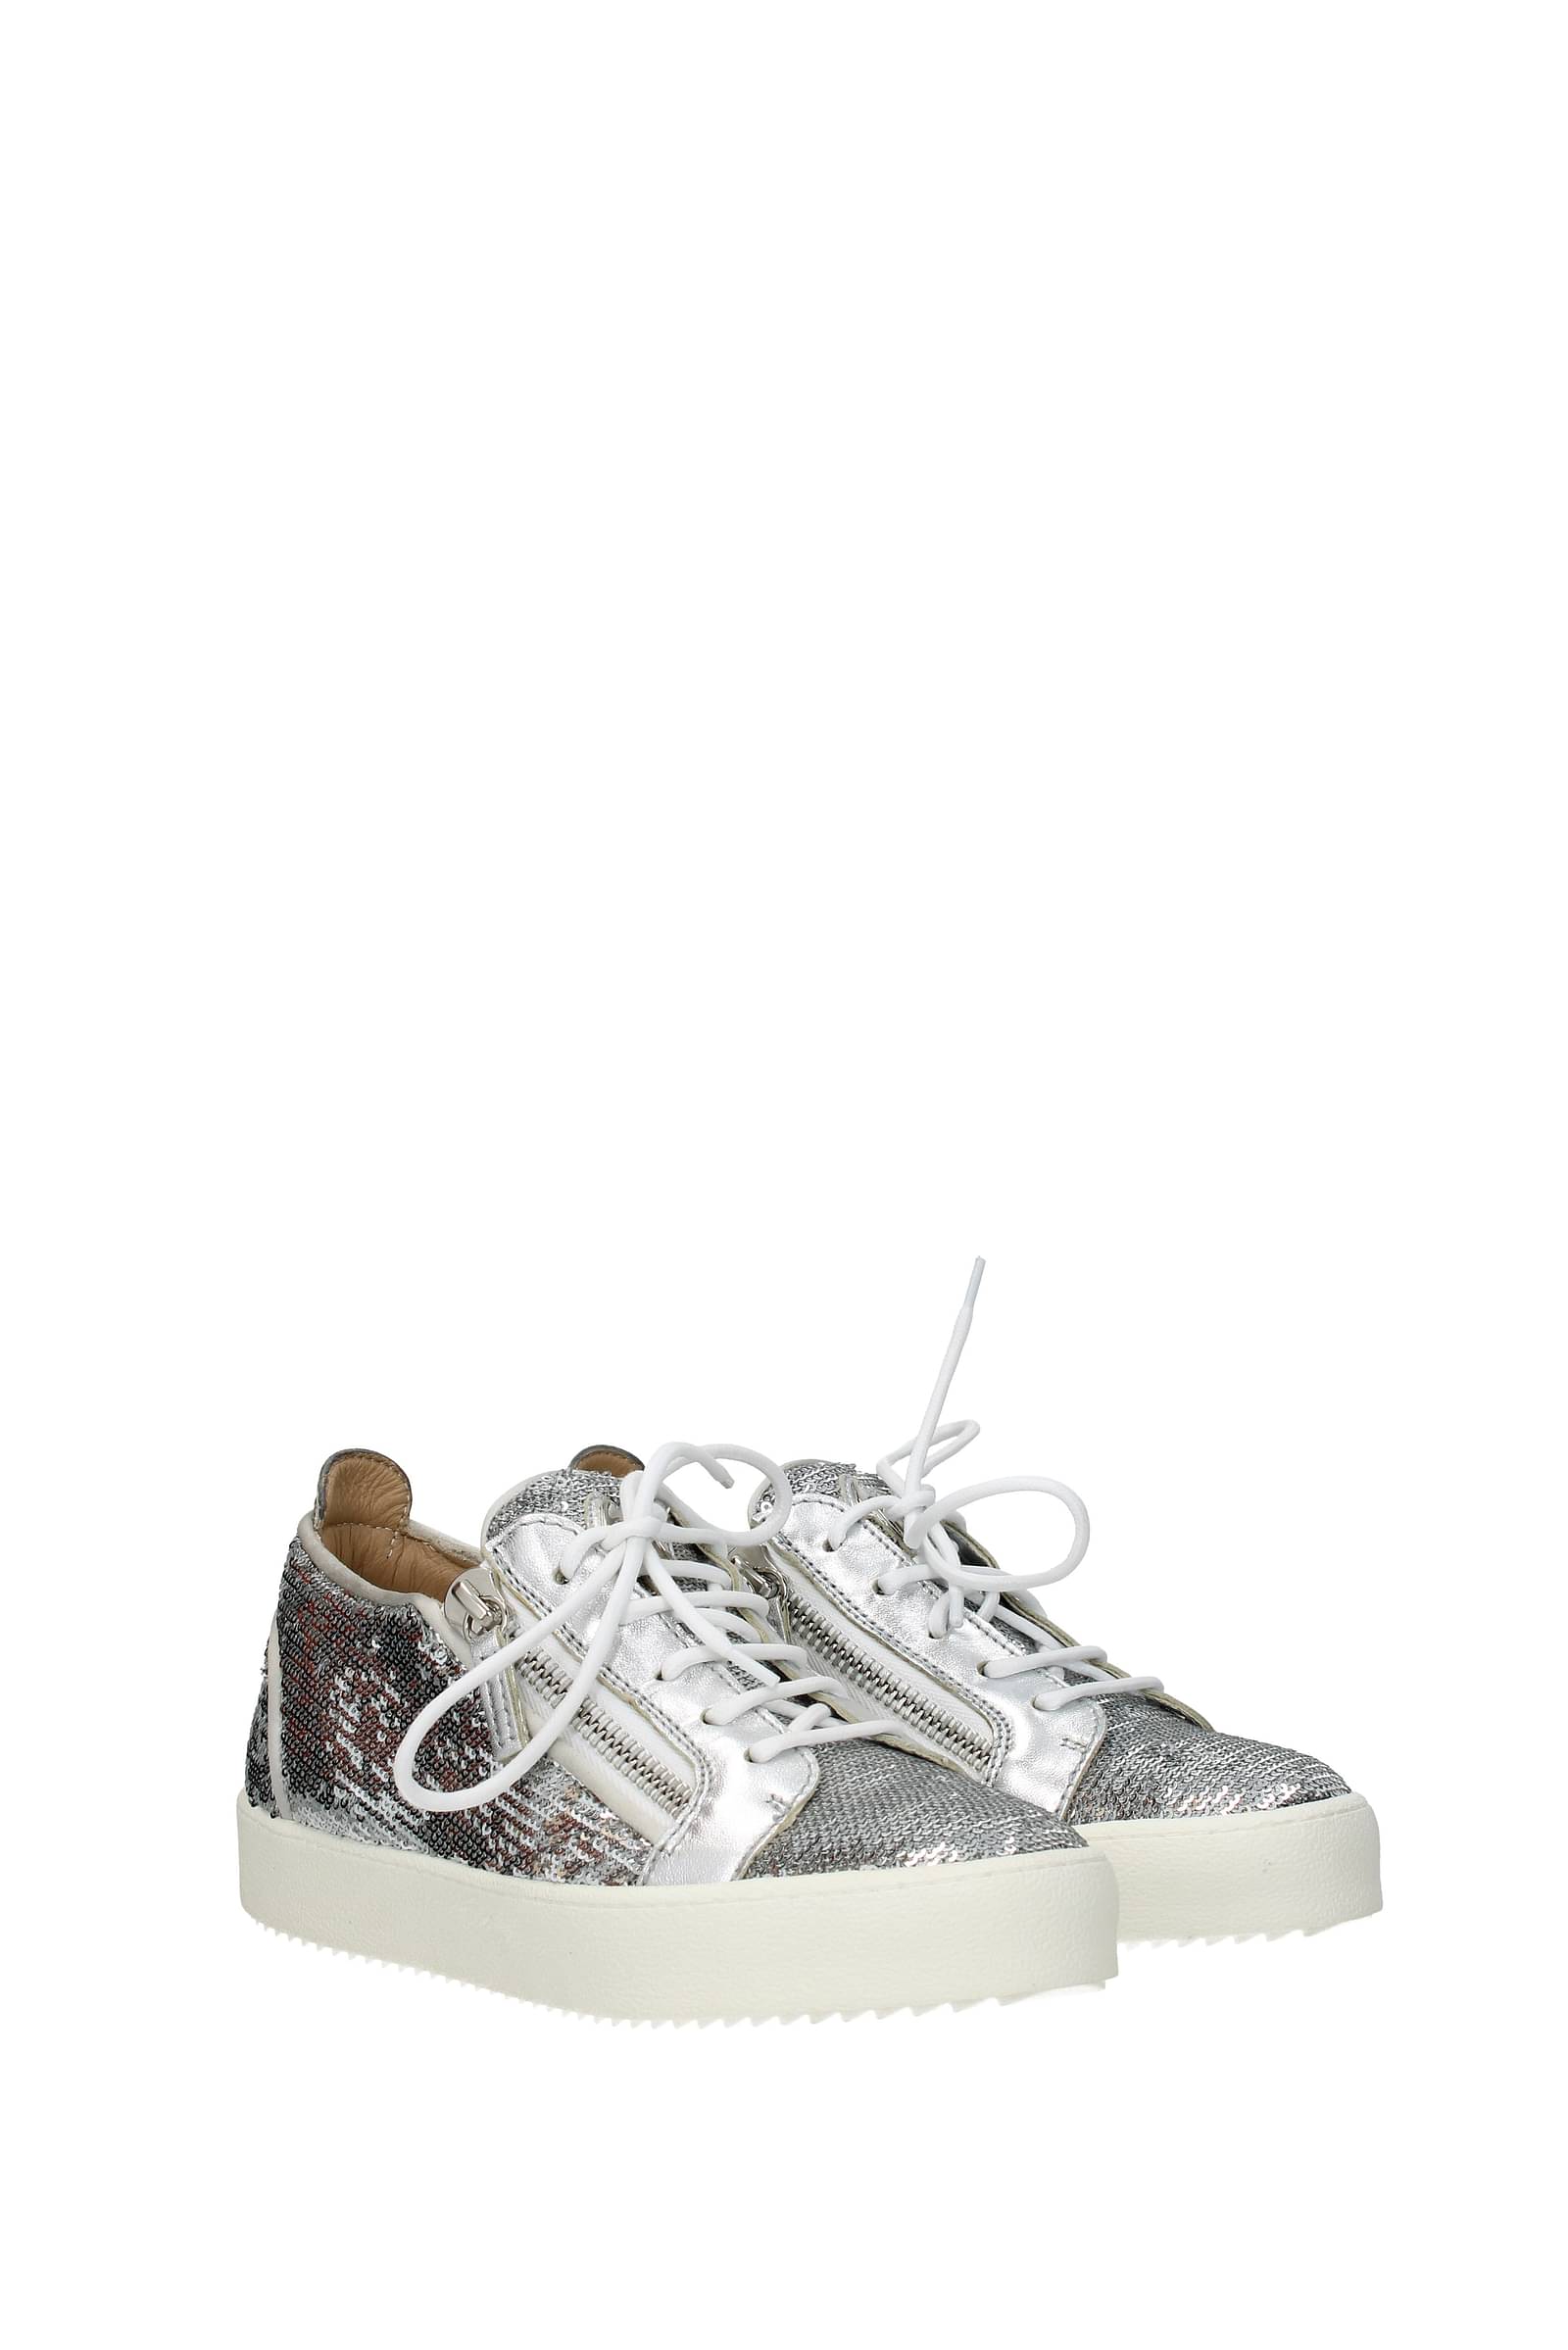 B-Exit Donna Scarpe Sneakers Sneakers con glitter Sneakers may london Donna Paillettes 